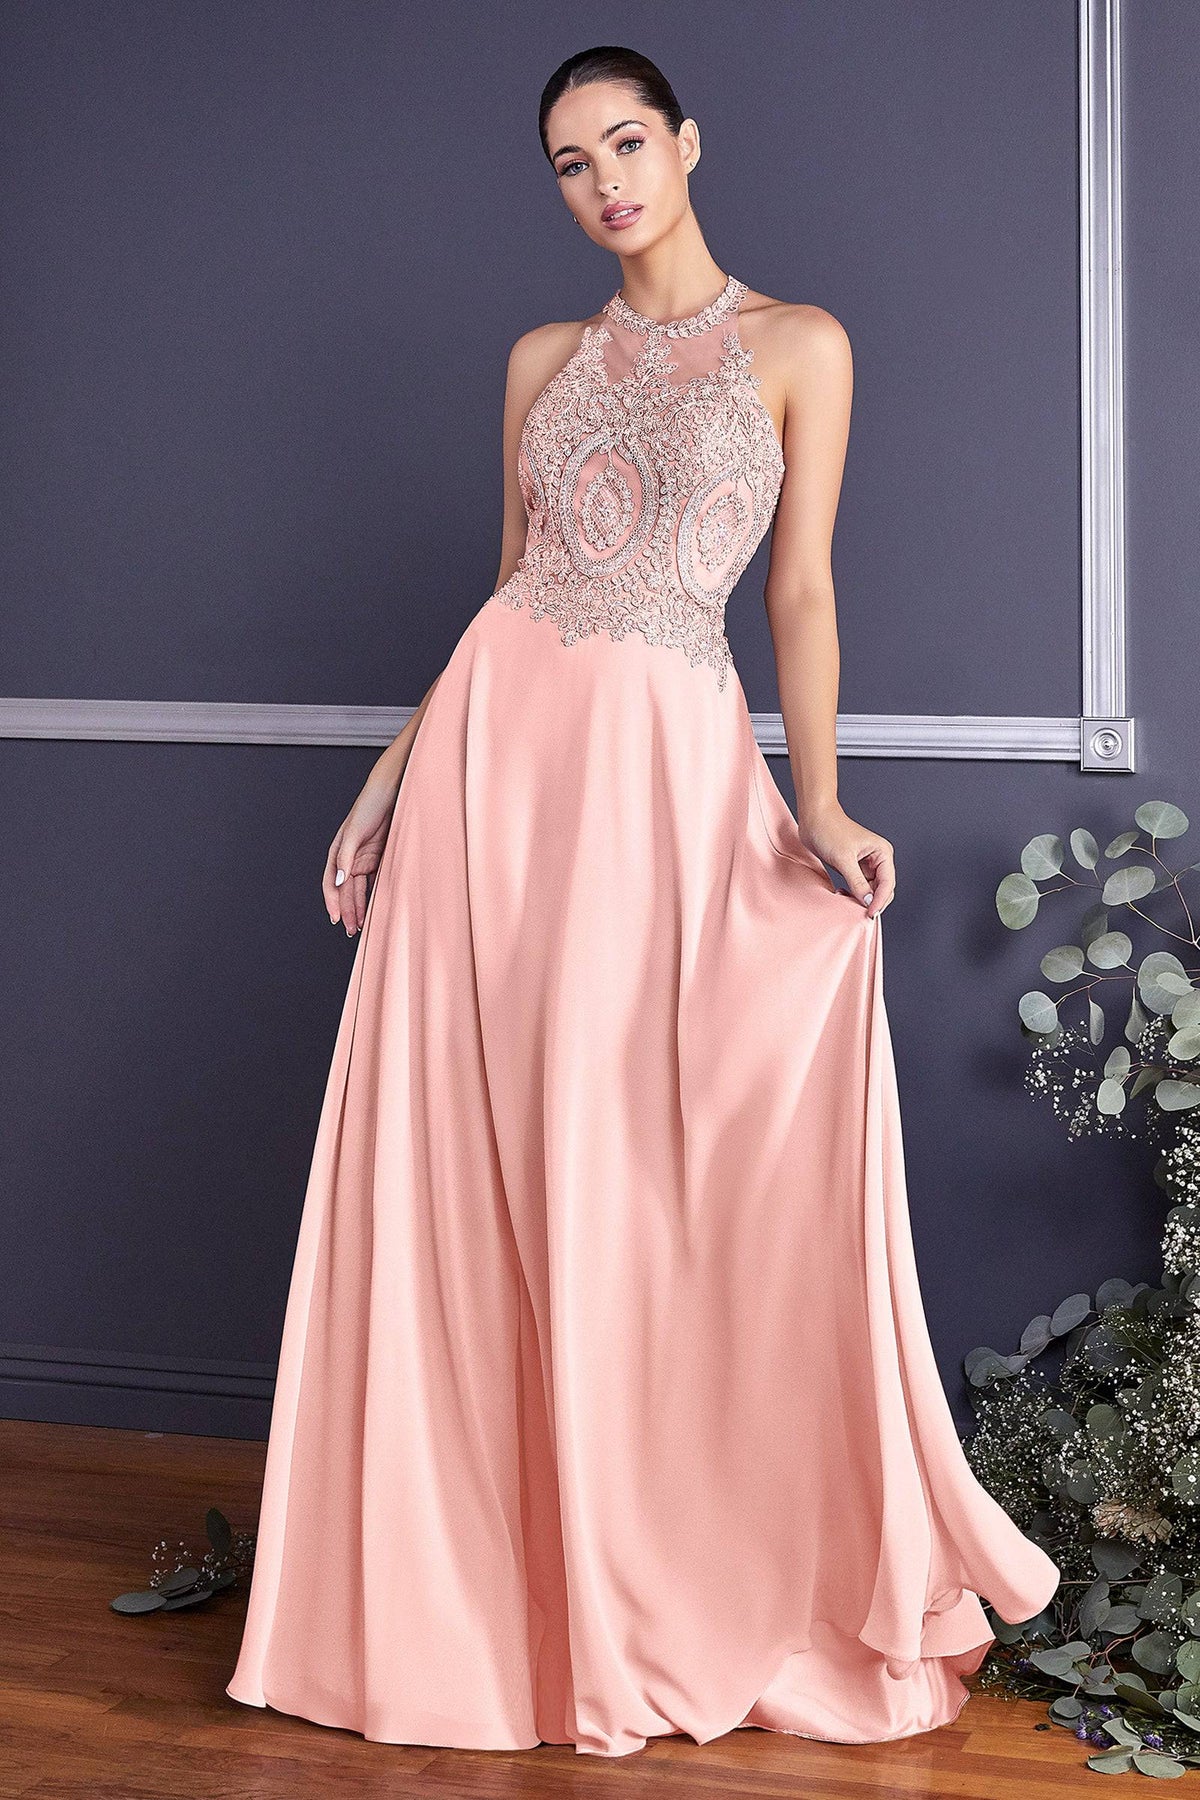 Stunning Long Gown with Embroidered Halter Top Neckline and Flowy Skirt #CDUJ0120 - NORMA REED